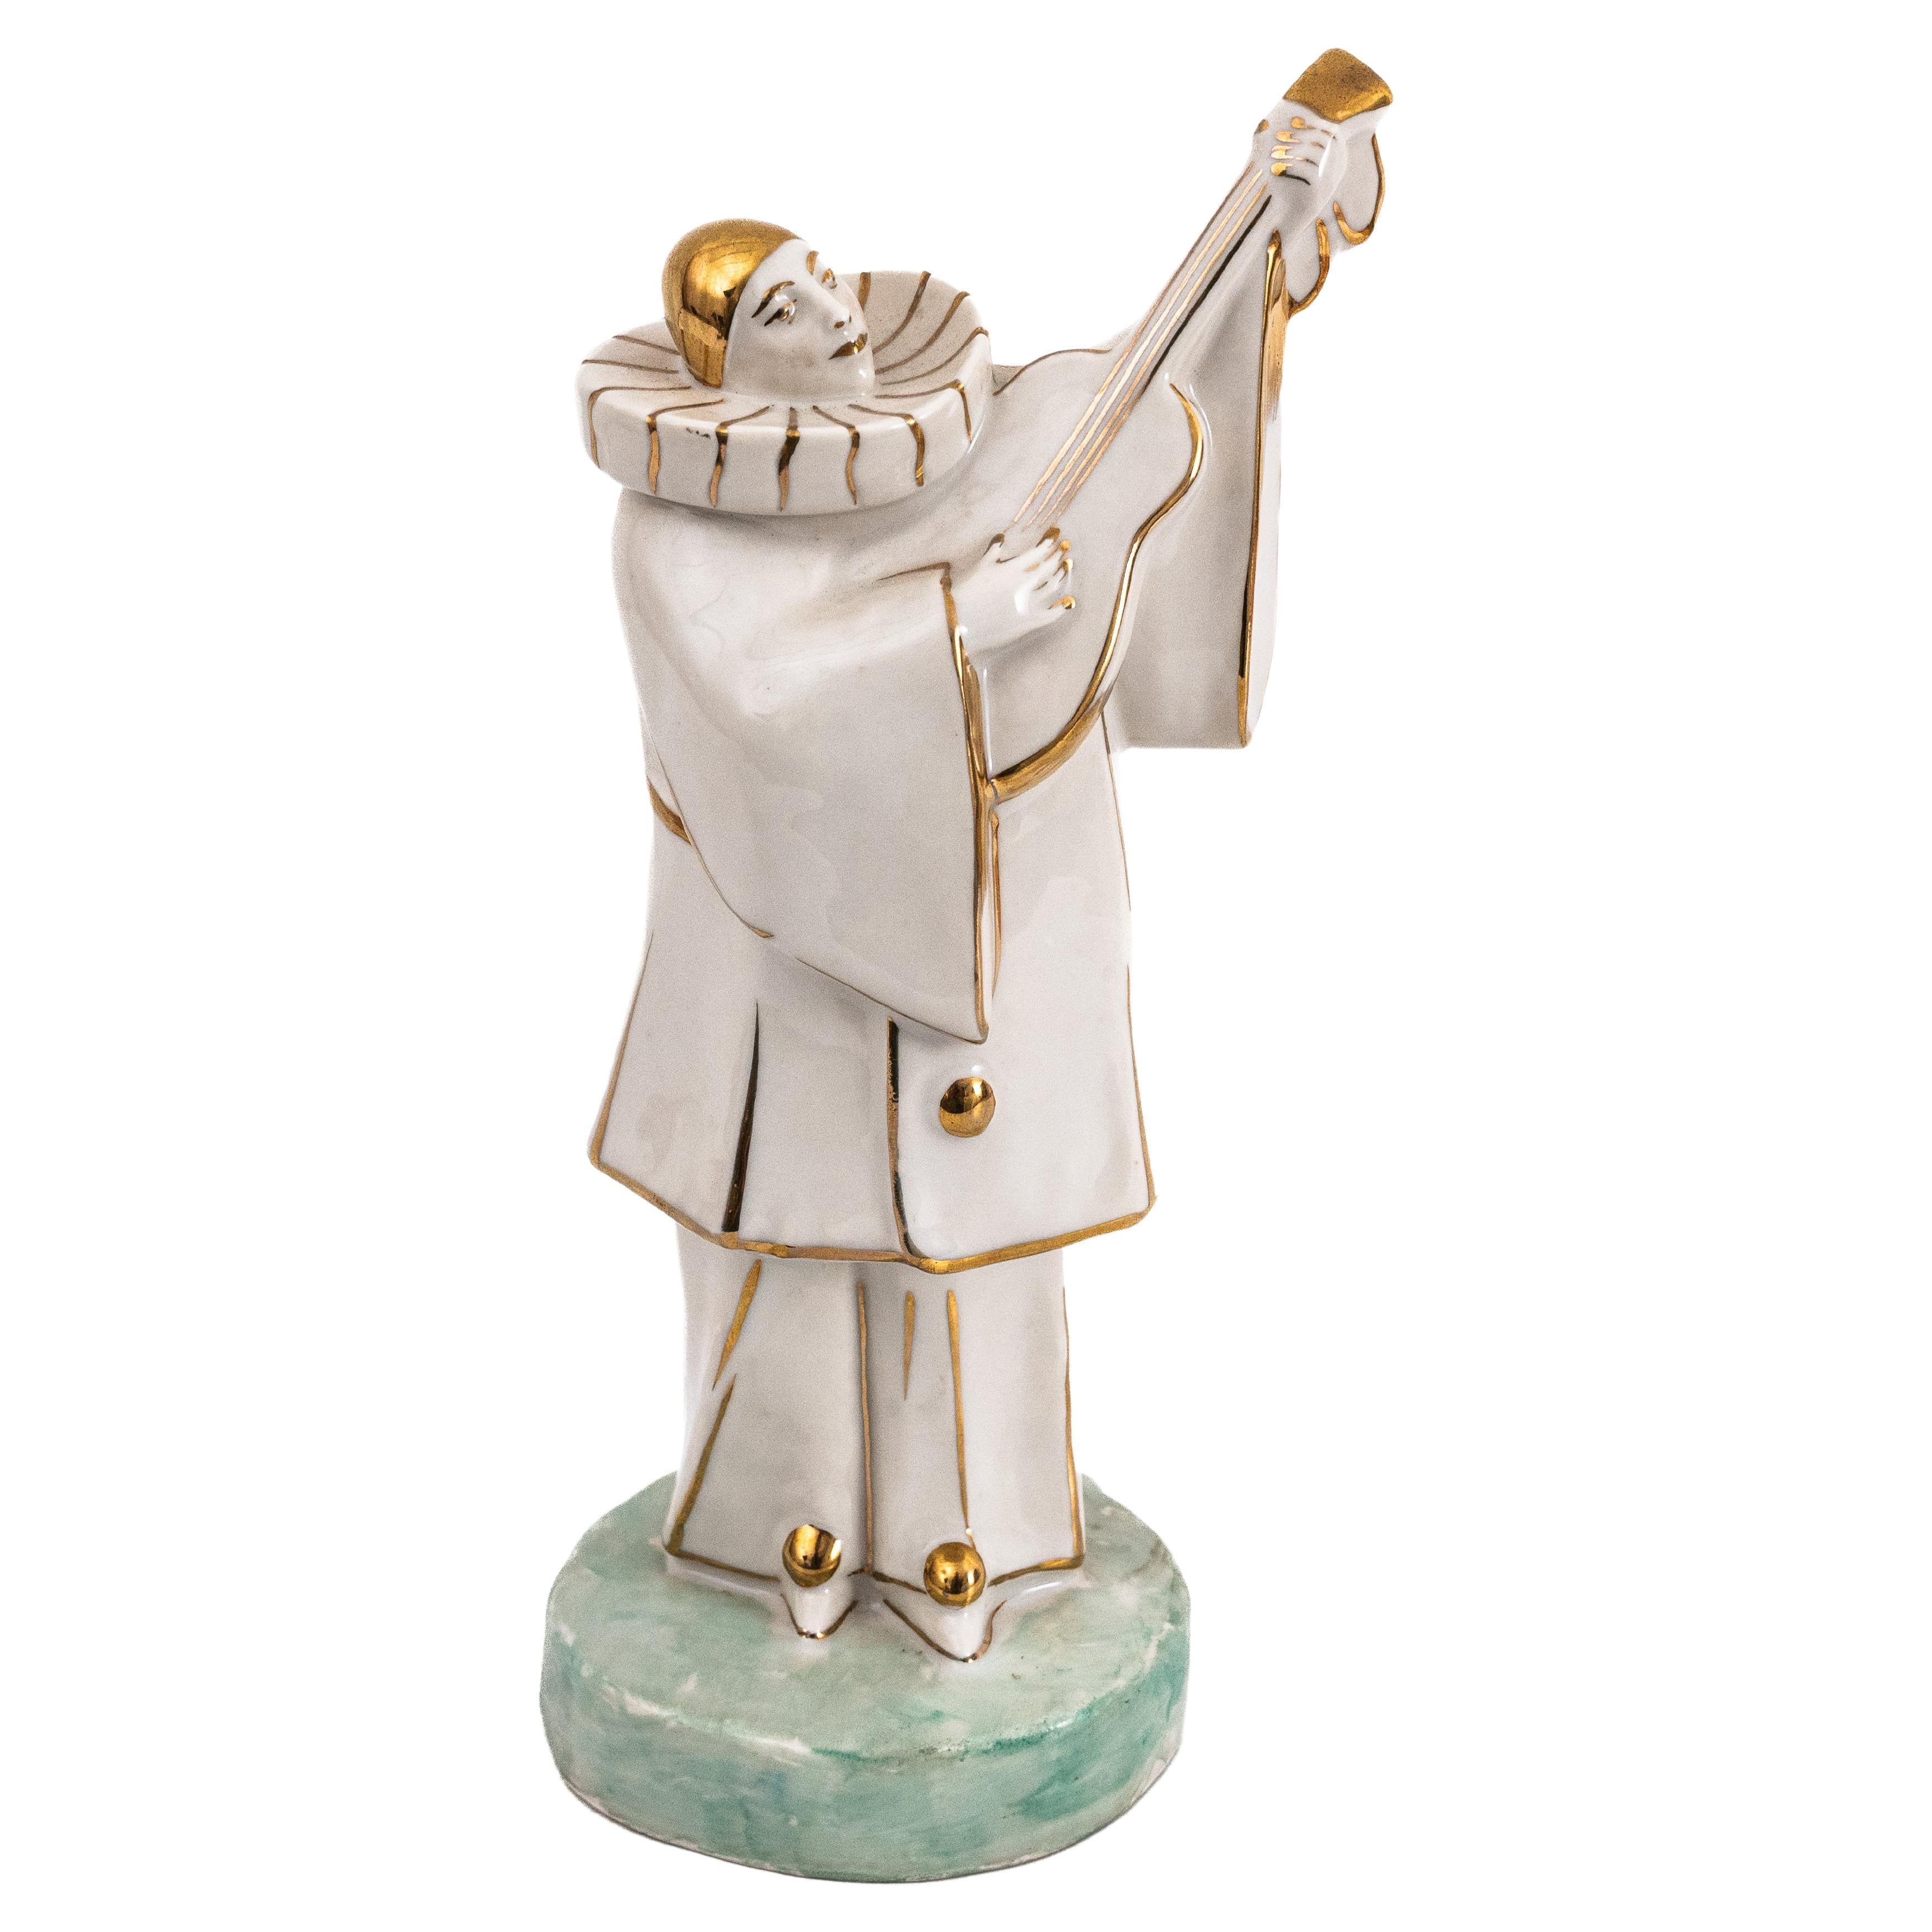 Limoges Porcelain Pierrot Musician in White and Gold by Edouard Marcel Sandoz For Sale